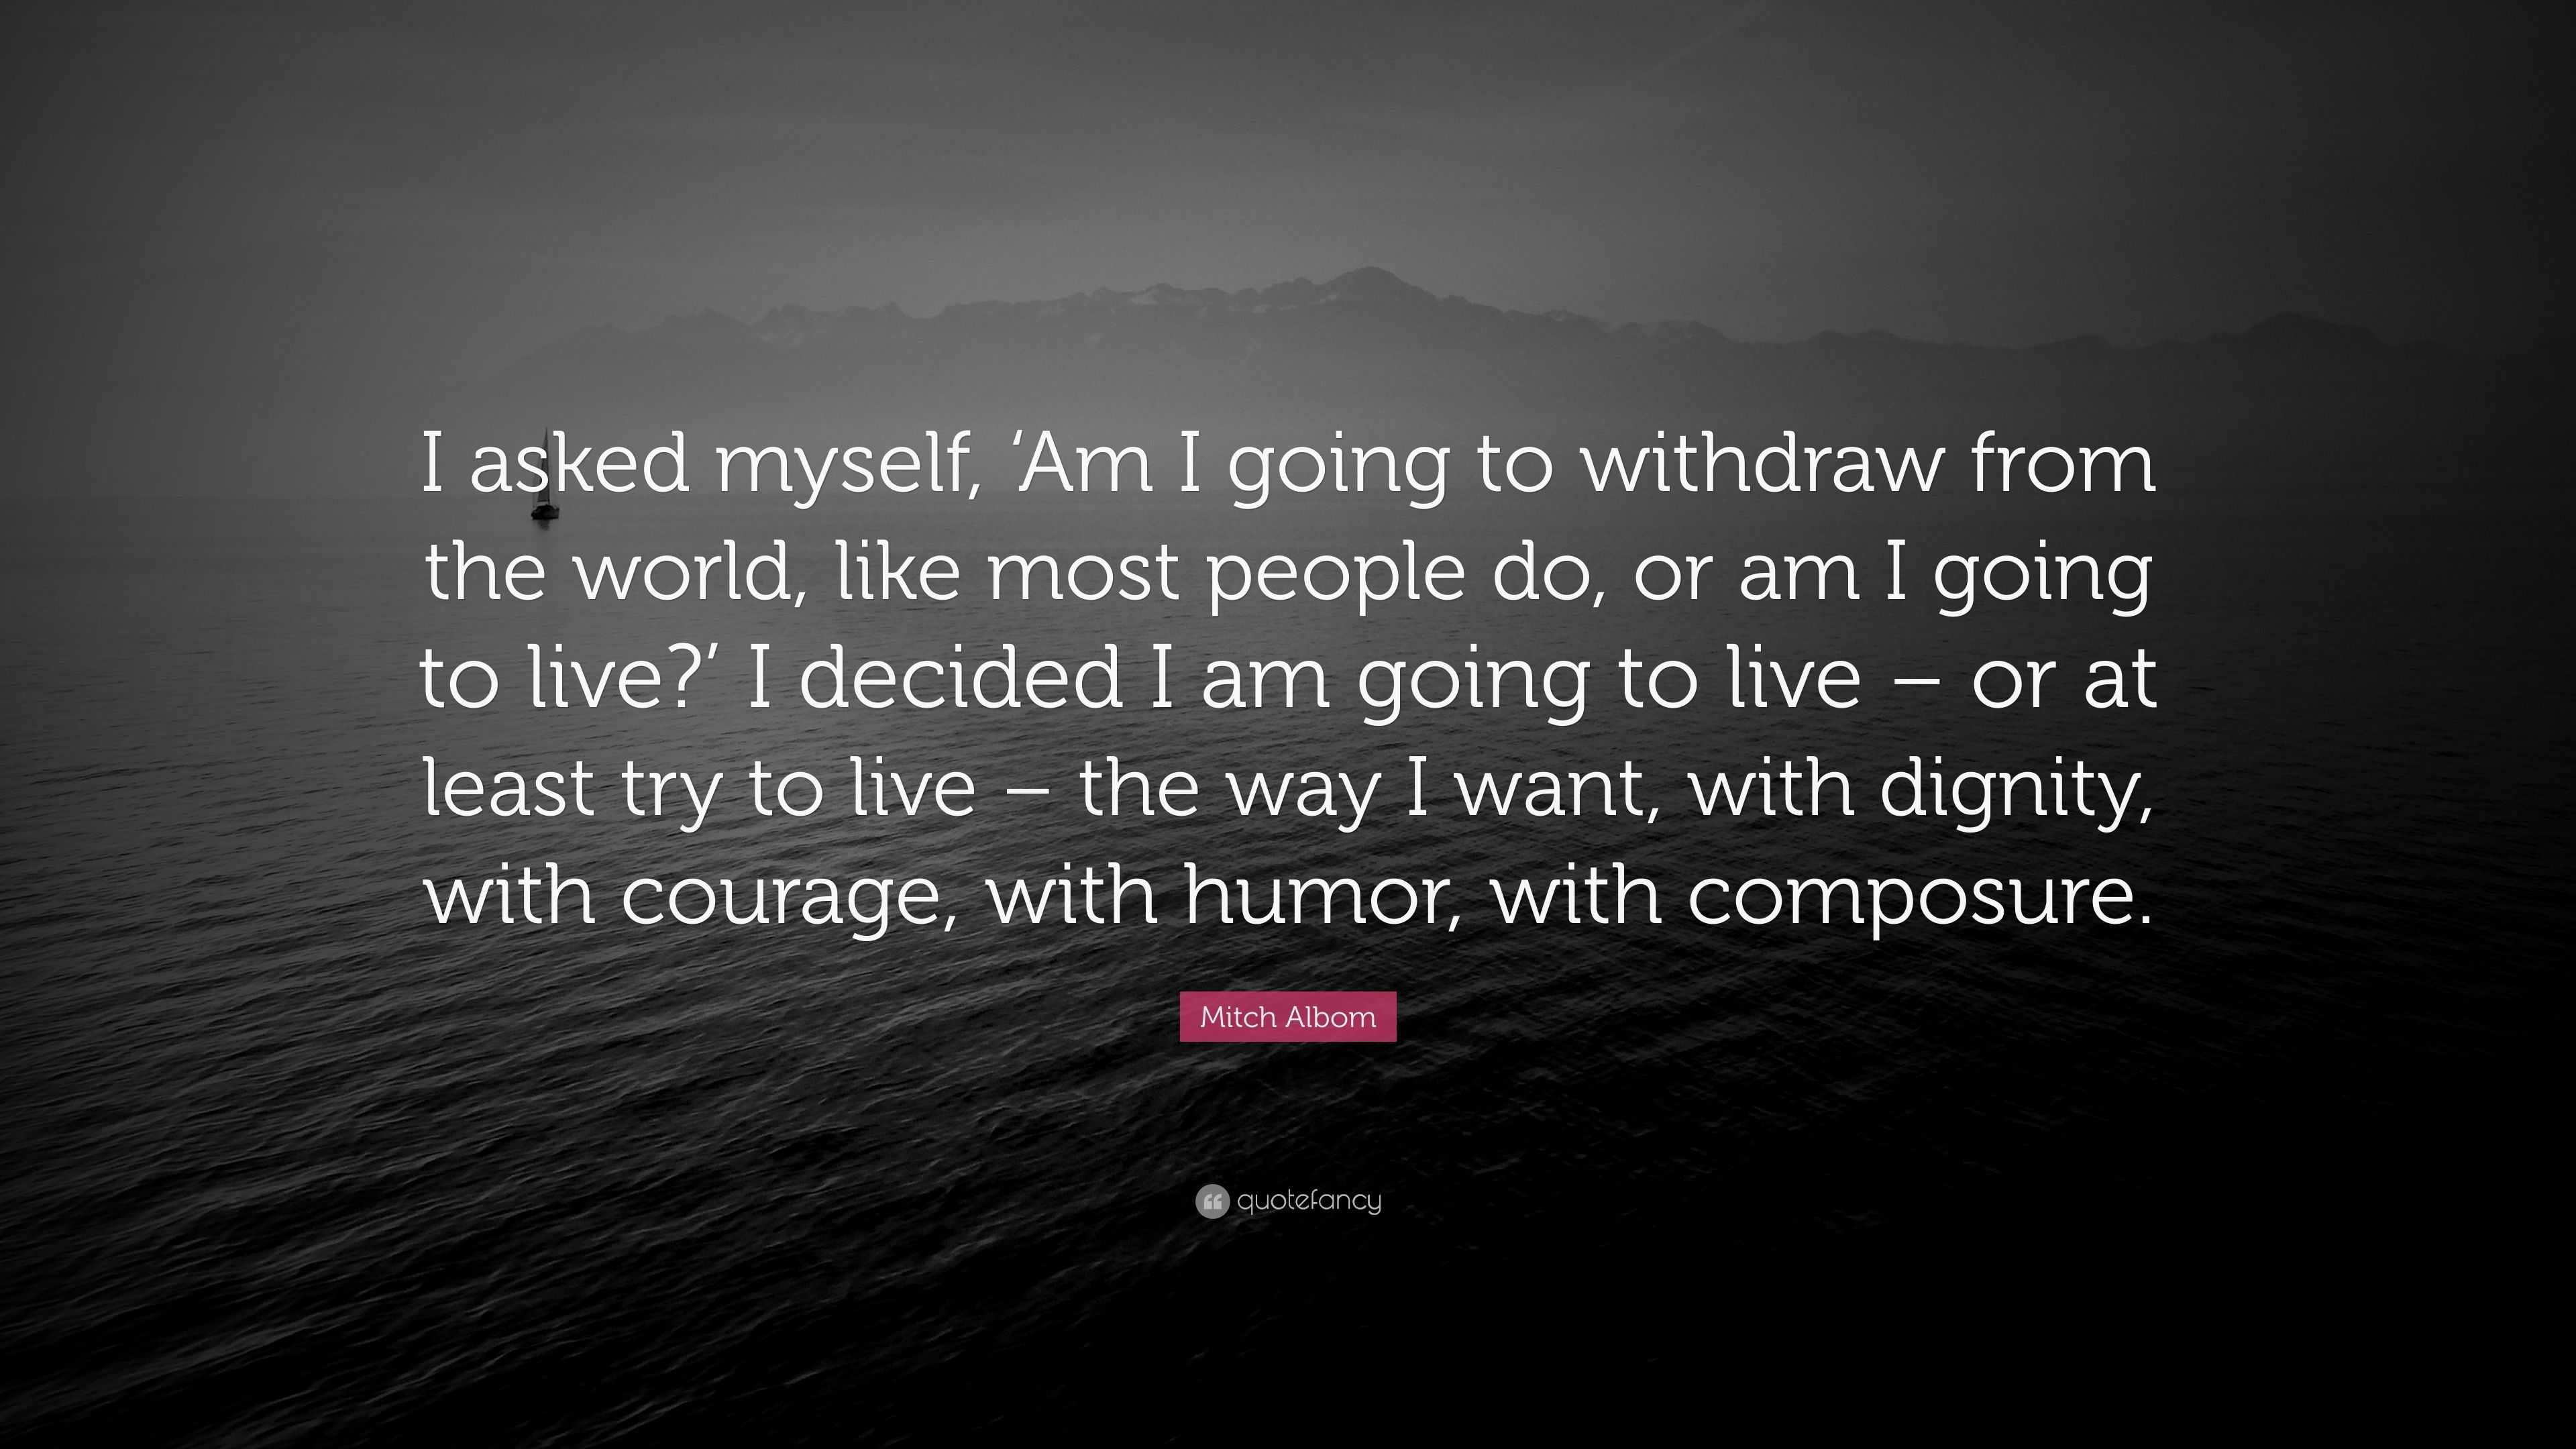 Mitch Albom Quote: "I asked myself, 'Am I going to ...